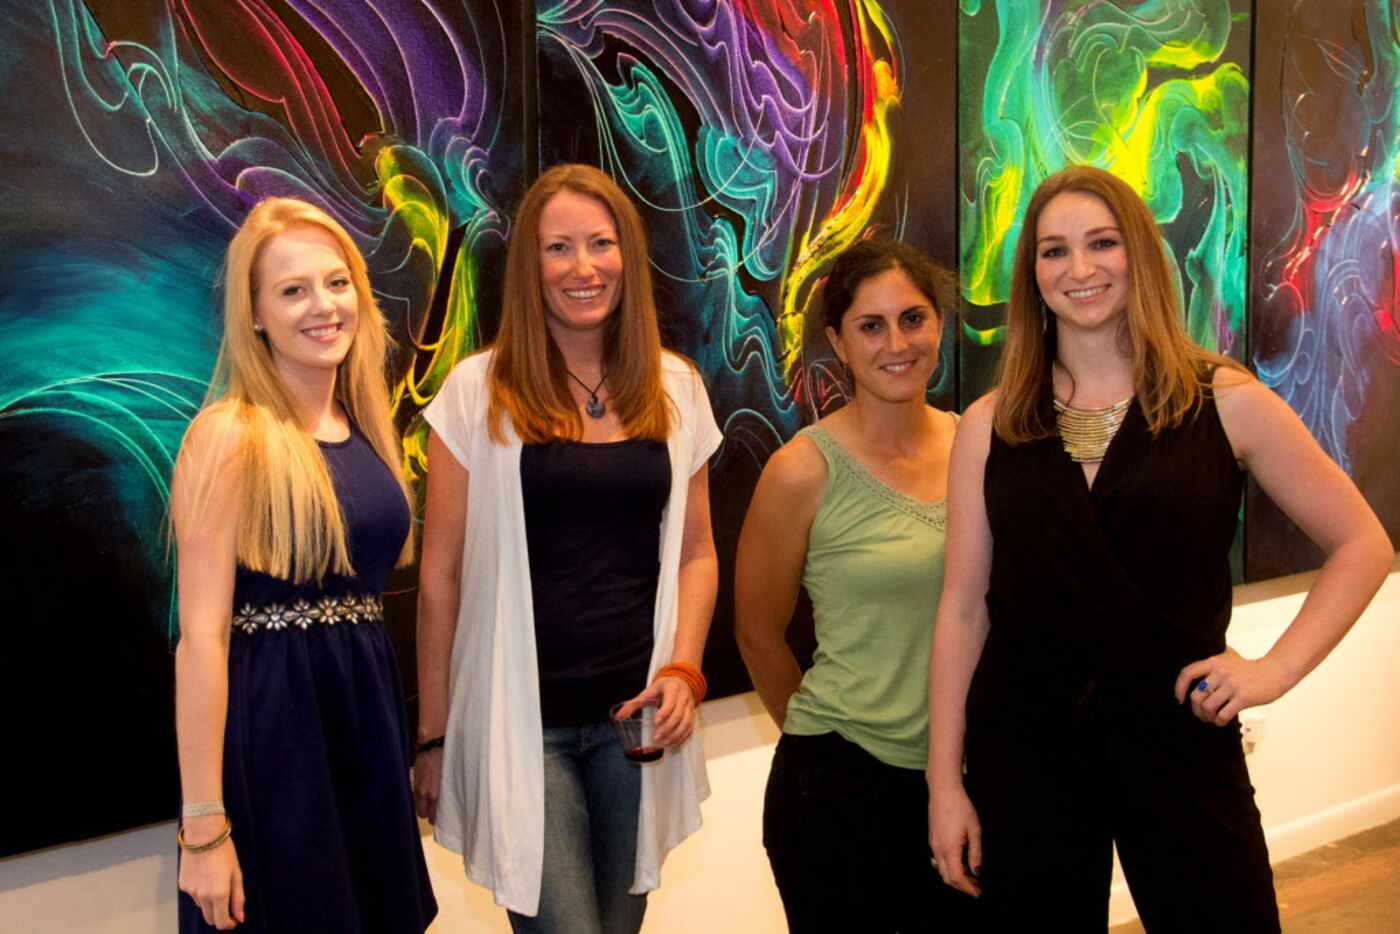 Groups of friends attended Men of Steel at Wall Gallery in the Design District on June 20. 2015